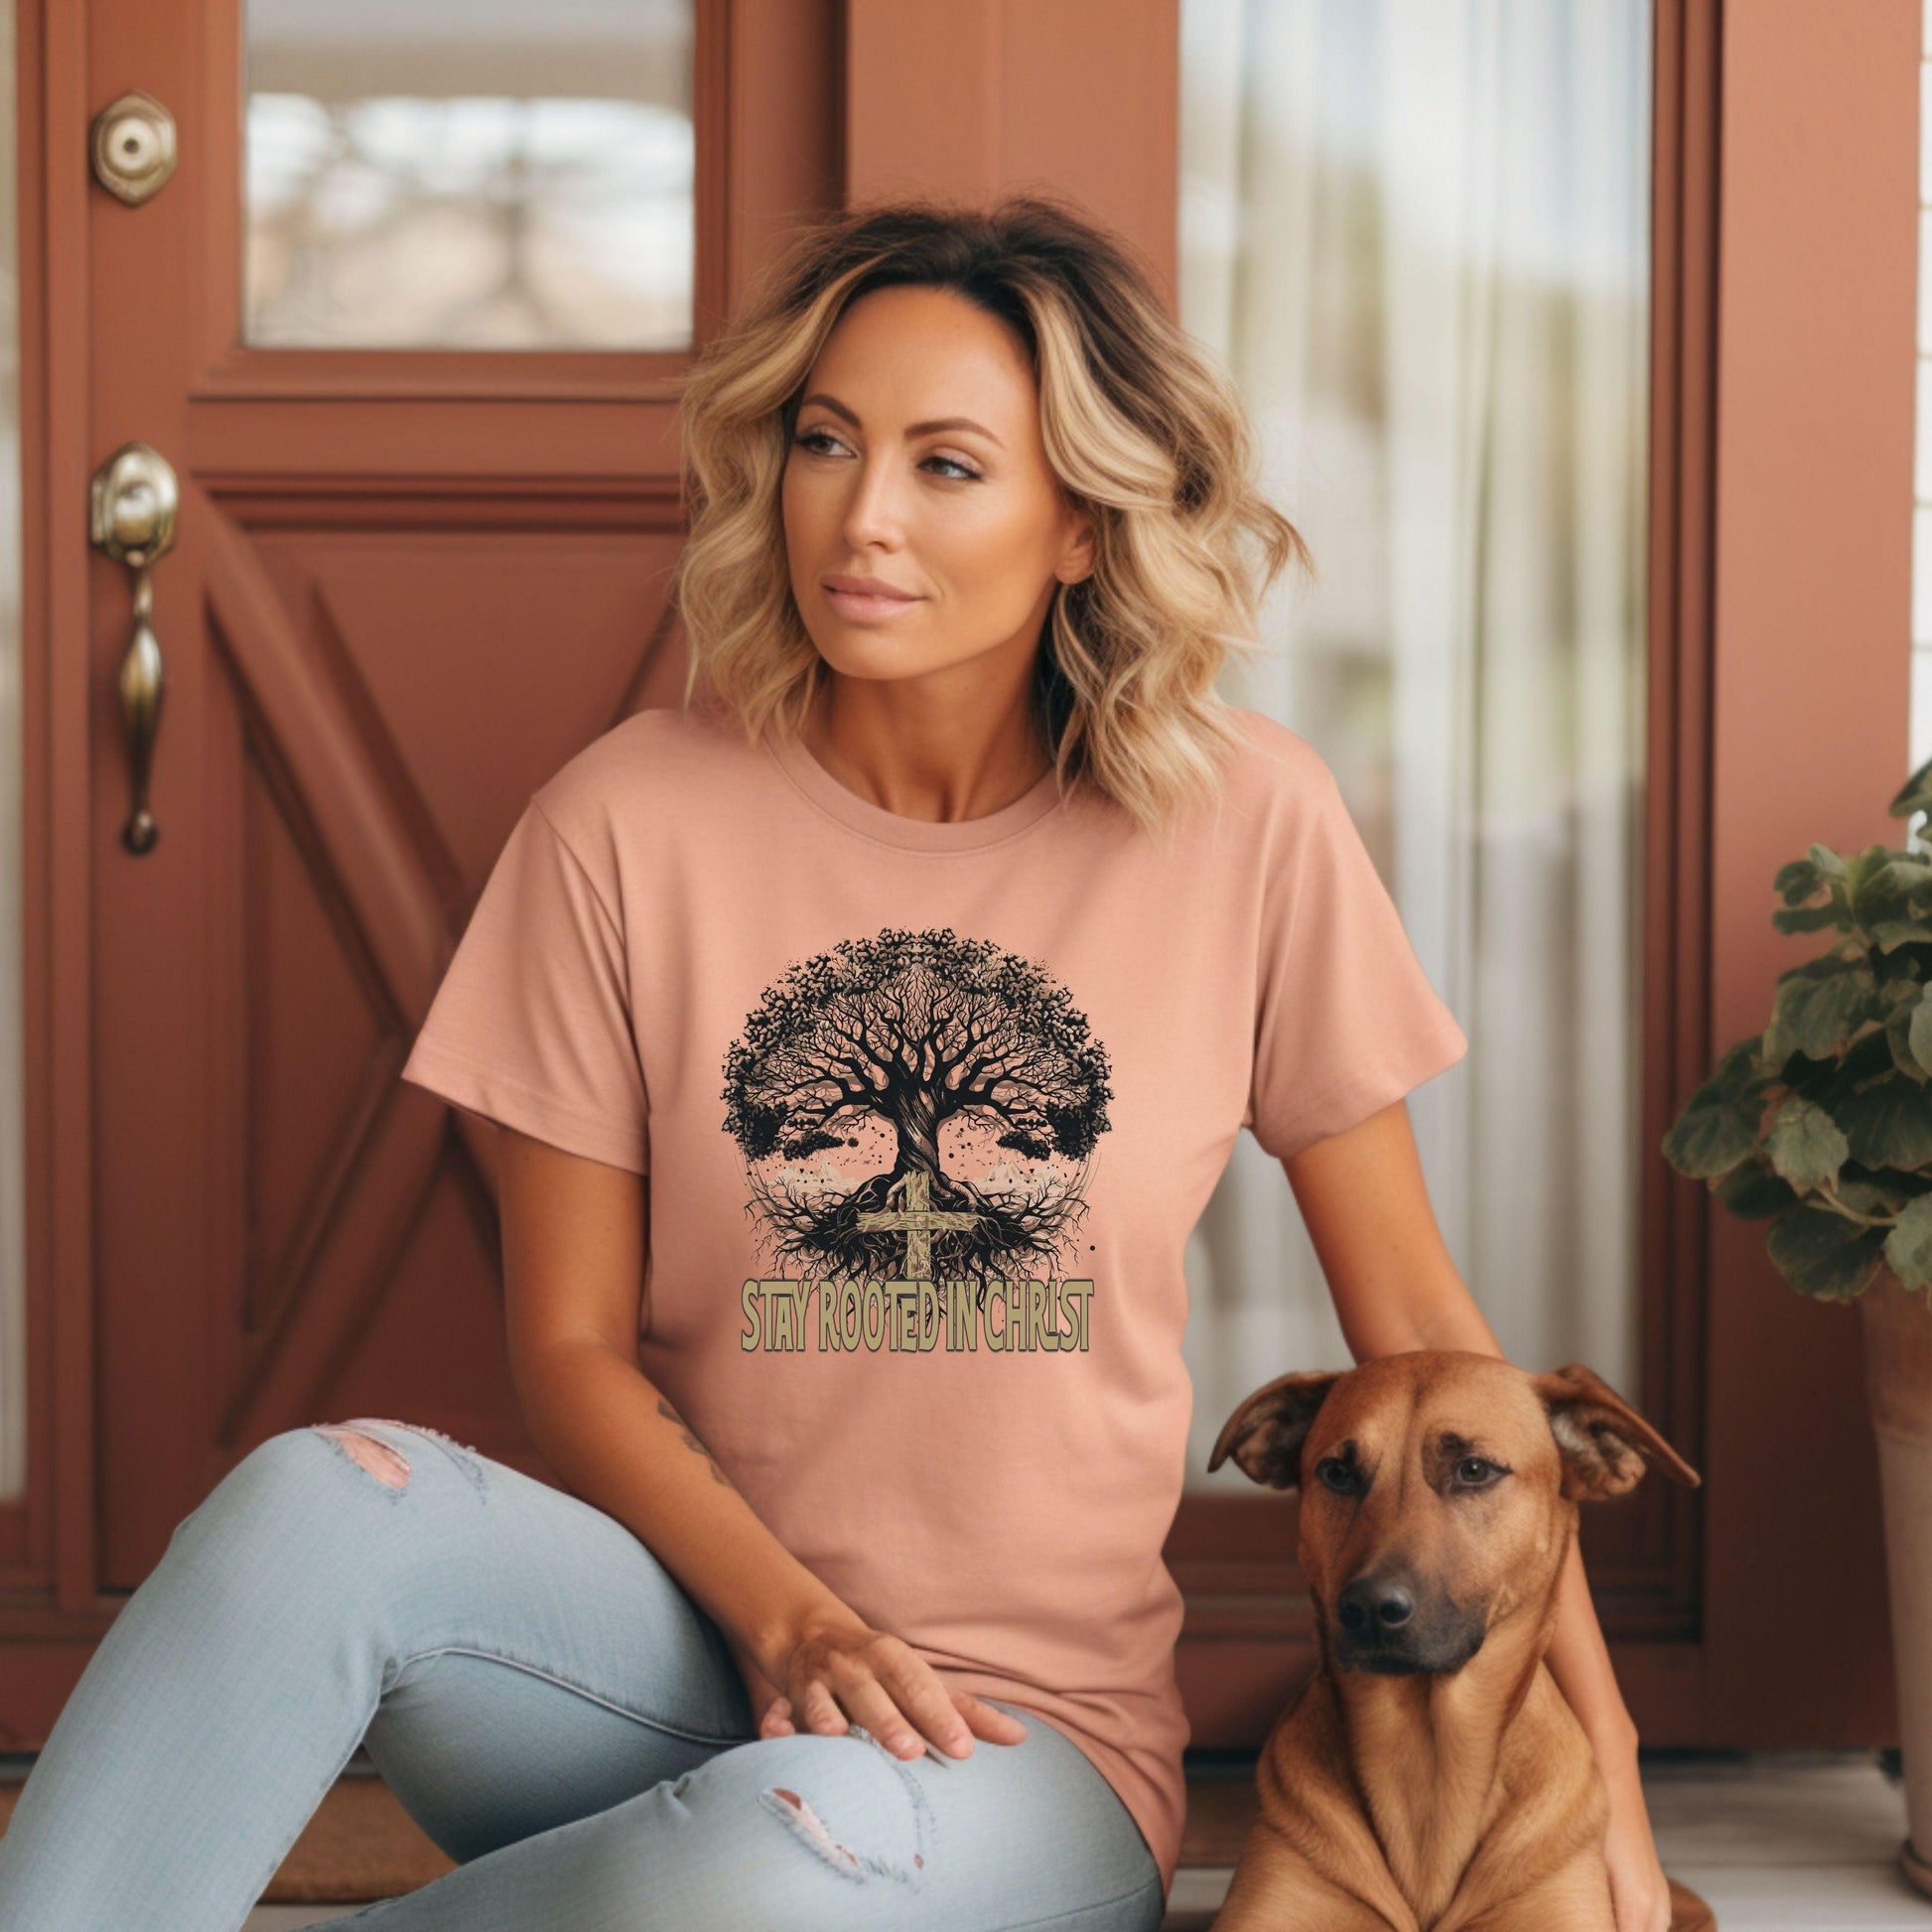 Stay Rooted In Christ Christian Tee - JT Footprint Apparel